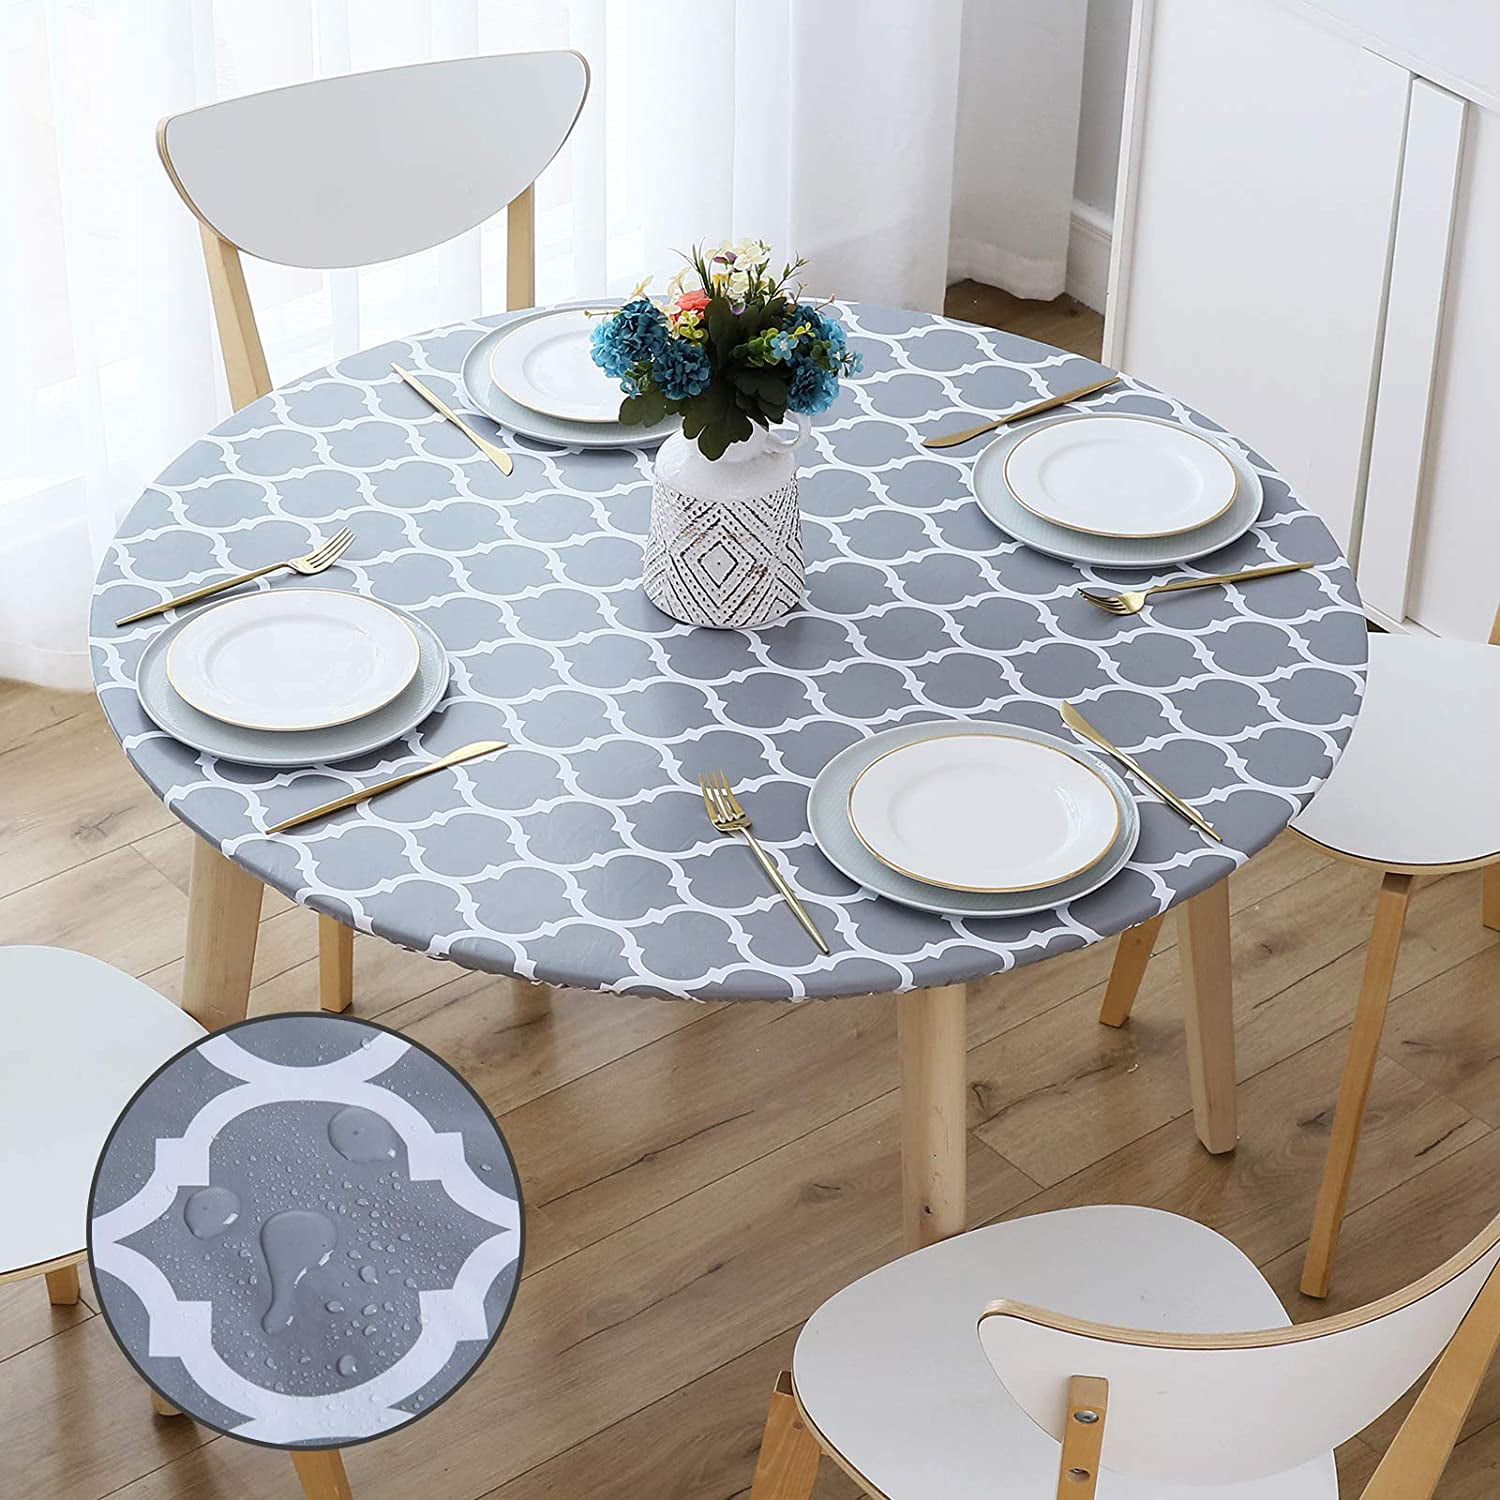 Round Vinyl Fitted Tablecloth W/ Flannel Backing Elastic Table Cover Waterproof 